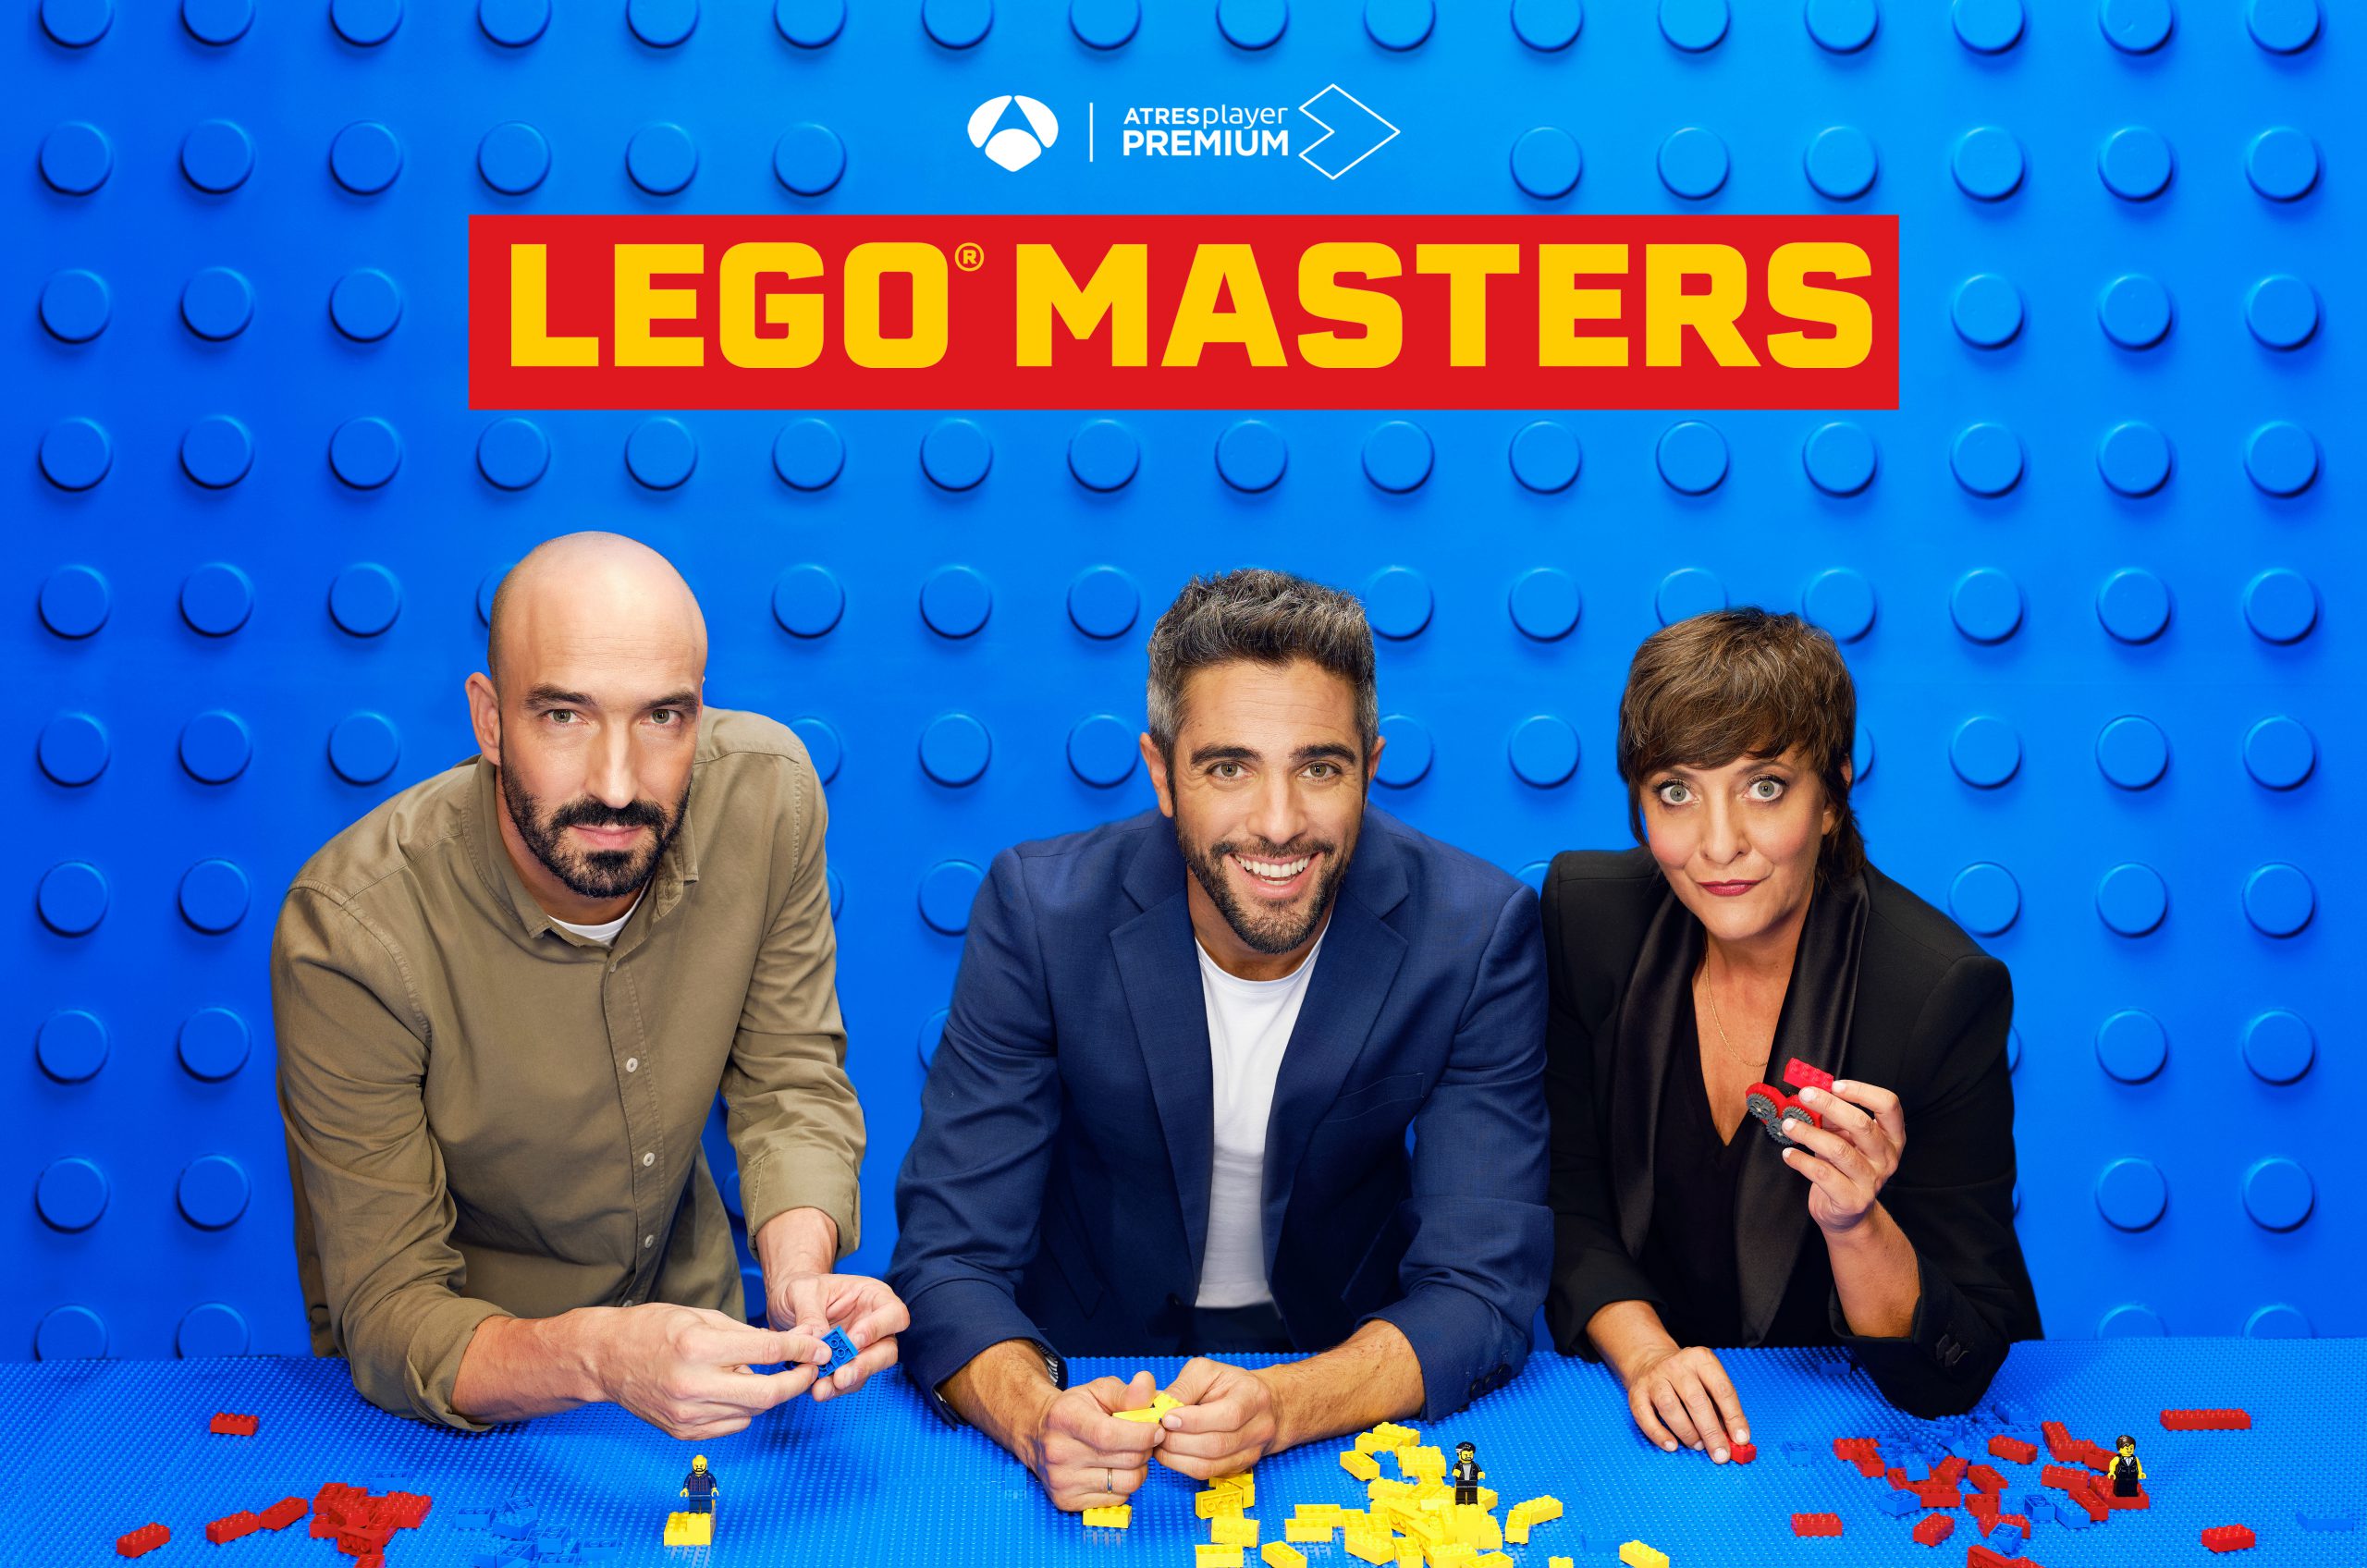 LEGO Masters’, the most spectacular competition on television, arrives on Antena 3